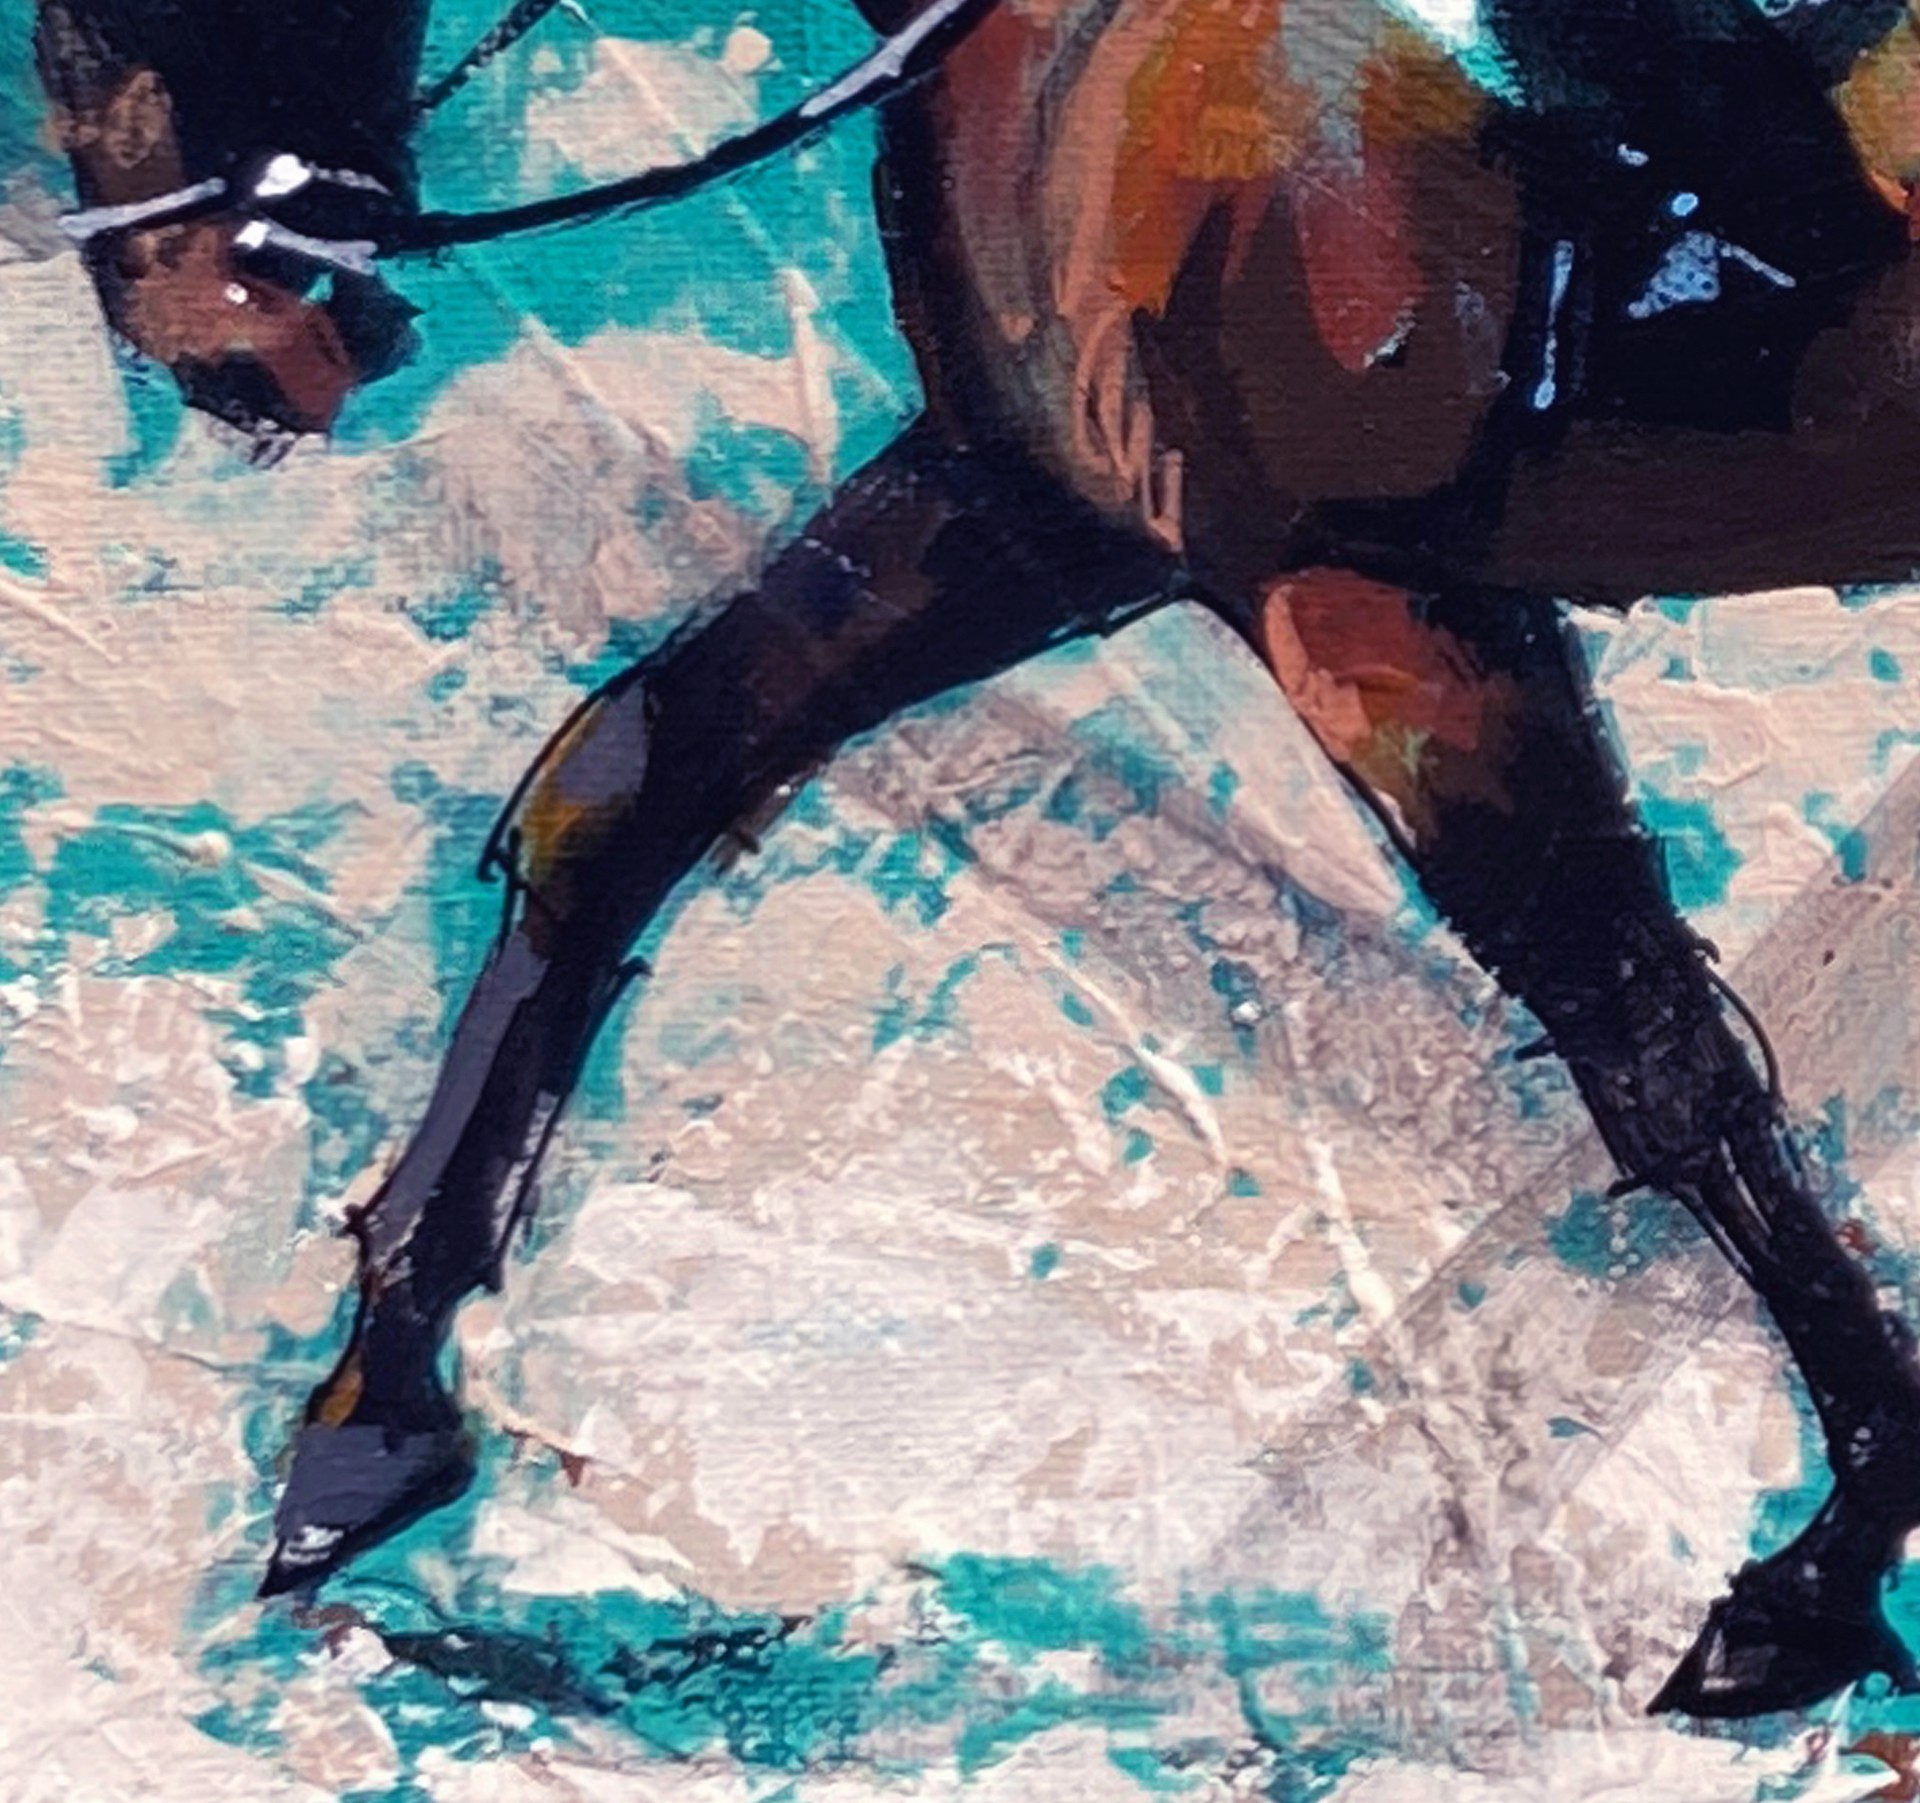 Trot on Teal by Tracy Wall